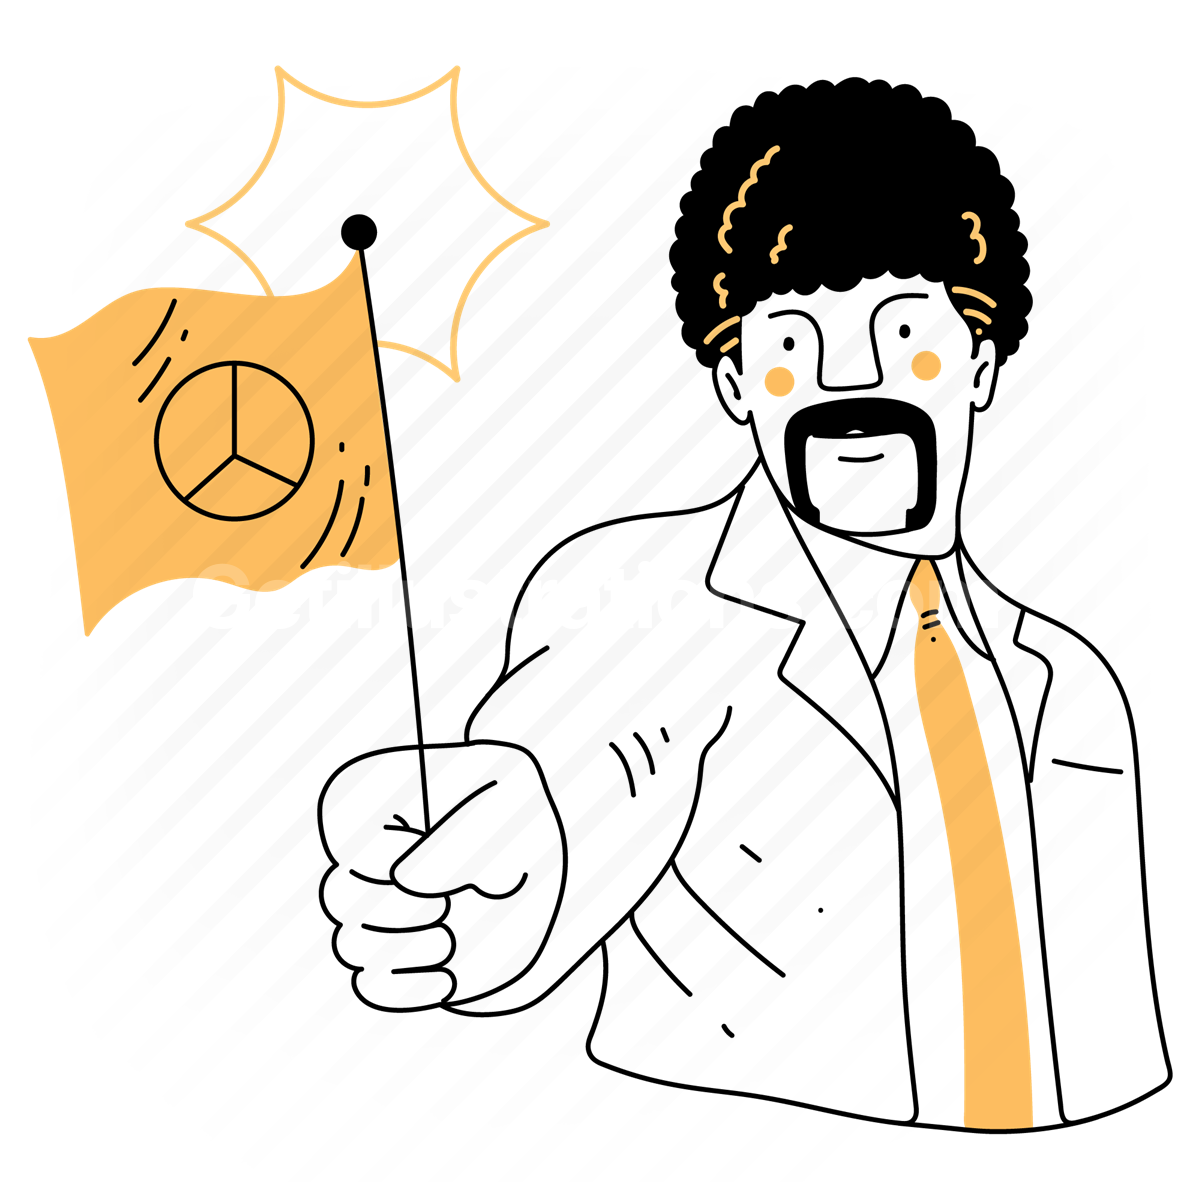 pulp fiction, flag, peace, sign, man, afro, movie, reference